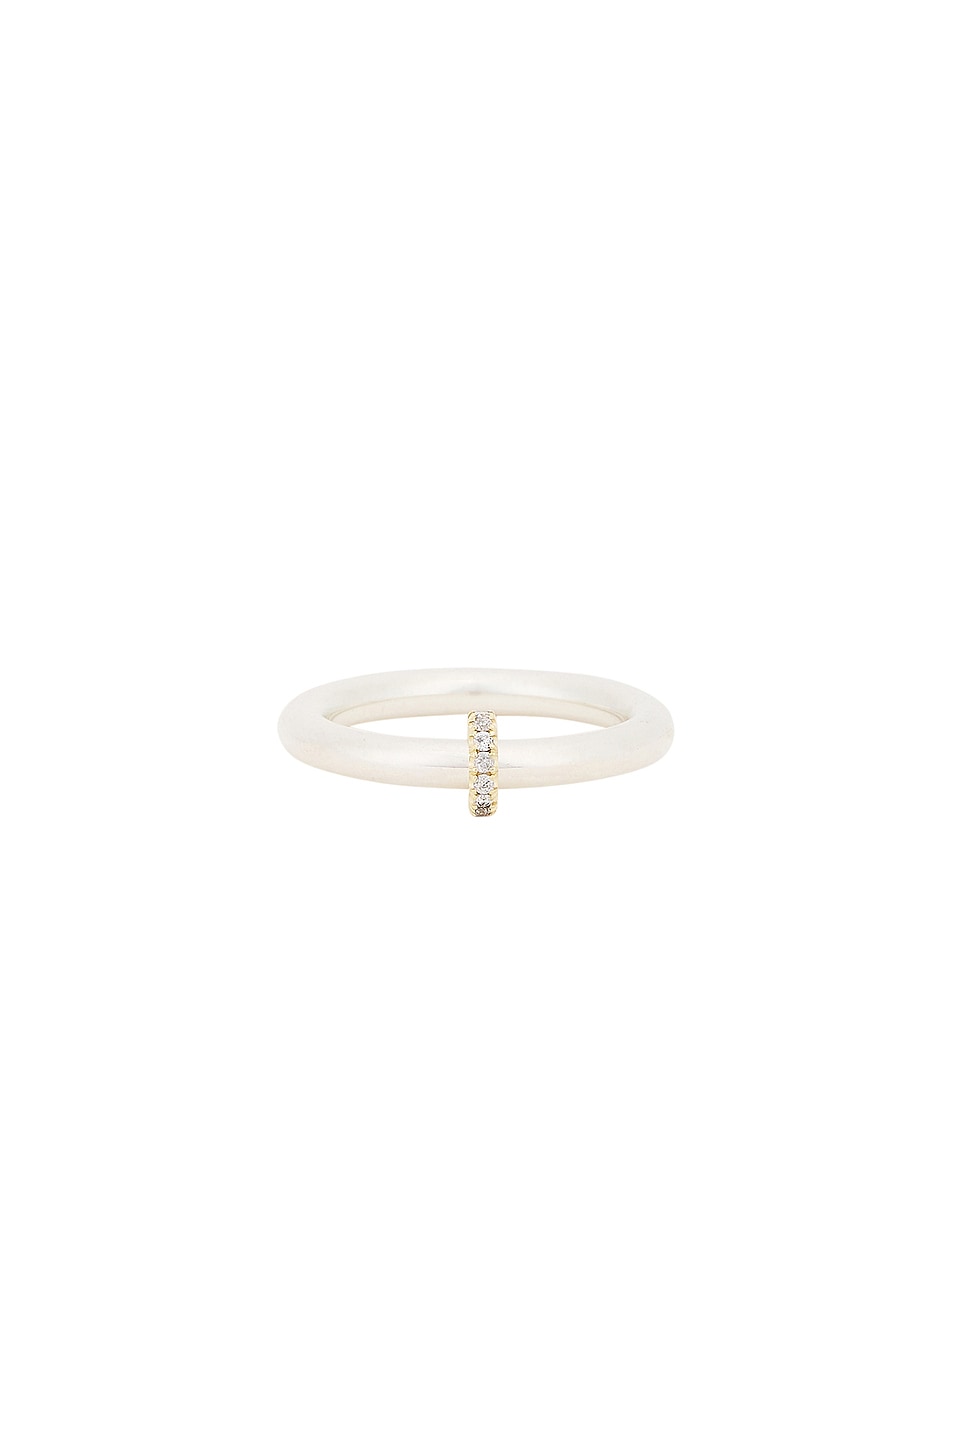 Image 1 of Spinelli Kilcollin Adonis Gris Ring in Sterling Silver, 18k Yellow Gold, & Grey Diamond